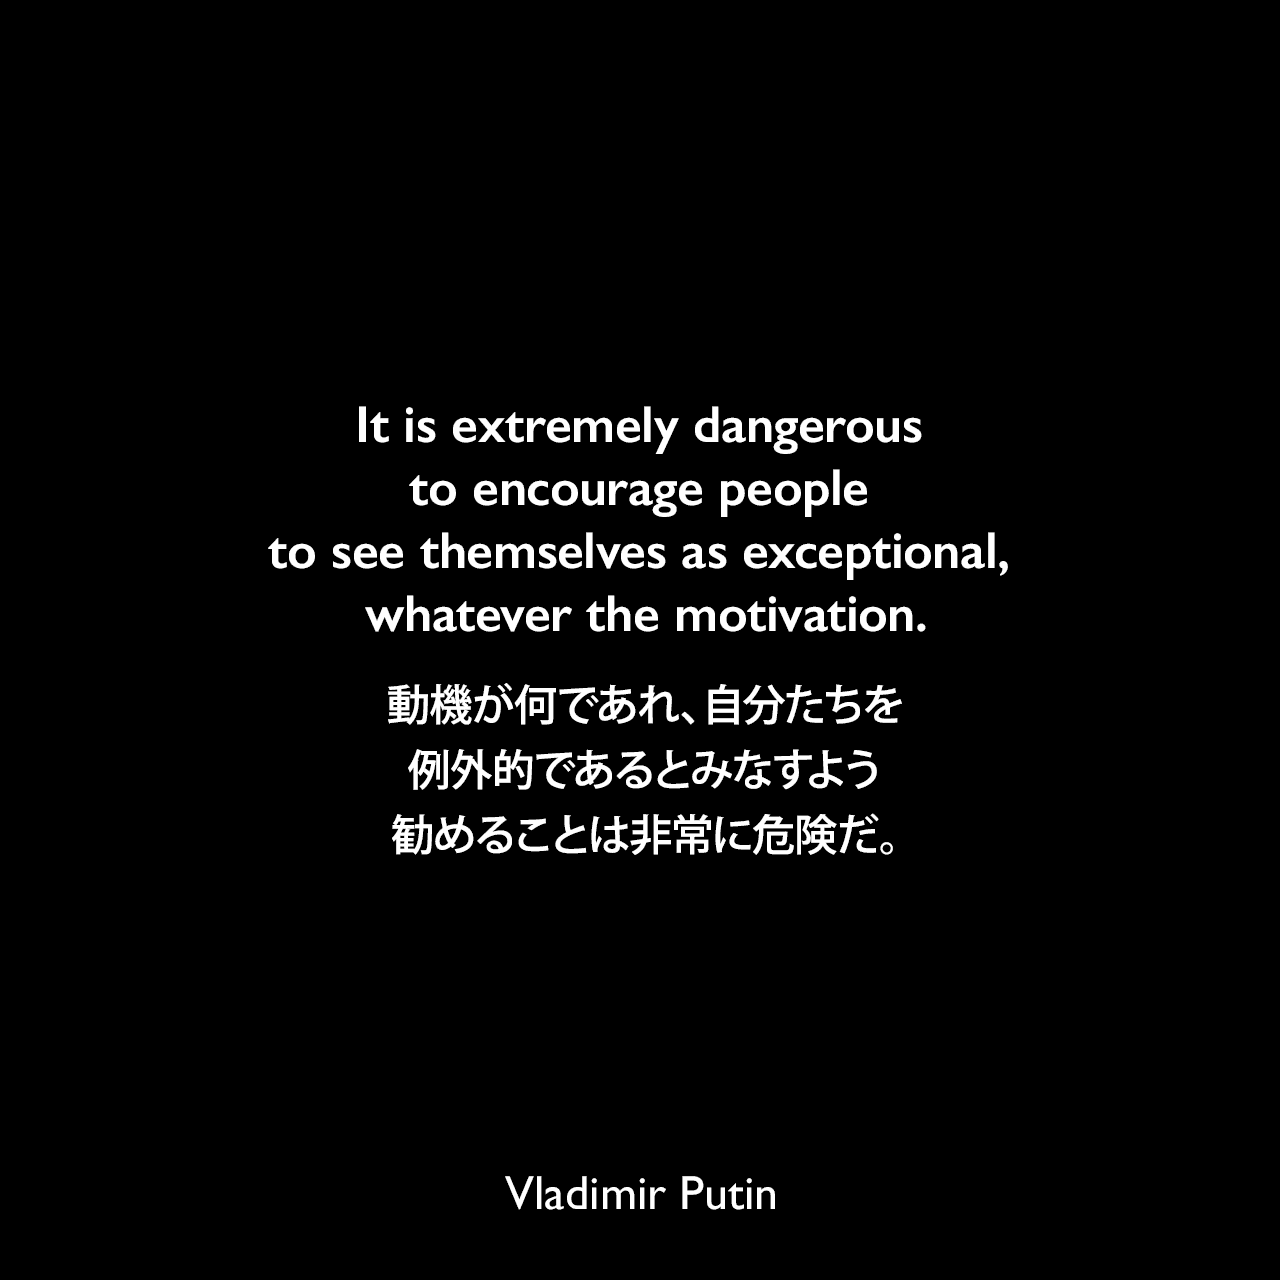 It is extremely dangerous to encourage people to see themselves as exceptional, whatever the motivation.動機が何であれ、自分たちを例外的であるとみなすよう勧めることは非常に危険だ。- 2013年9月「ニューヨーク・タイムズ誌」ロシアからの警告の嘆願よりVladimir Putin